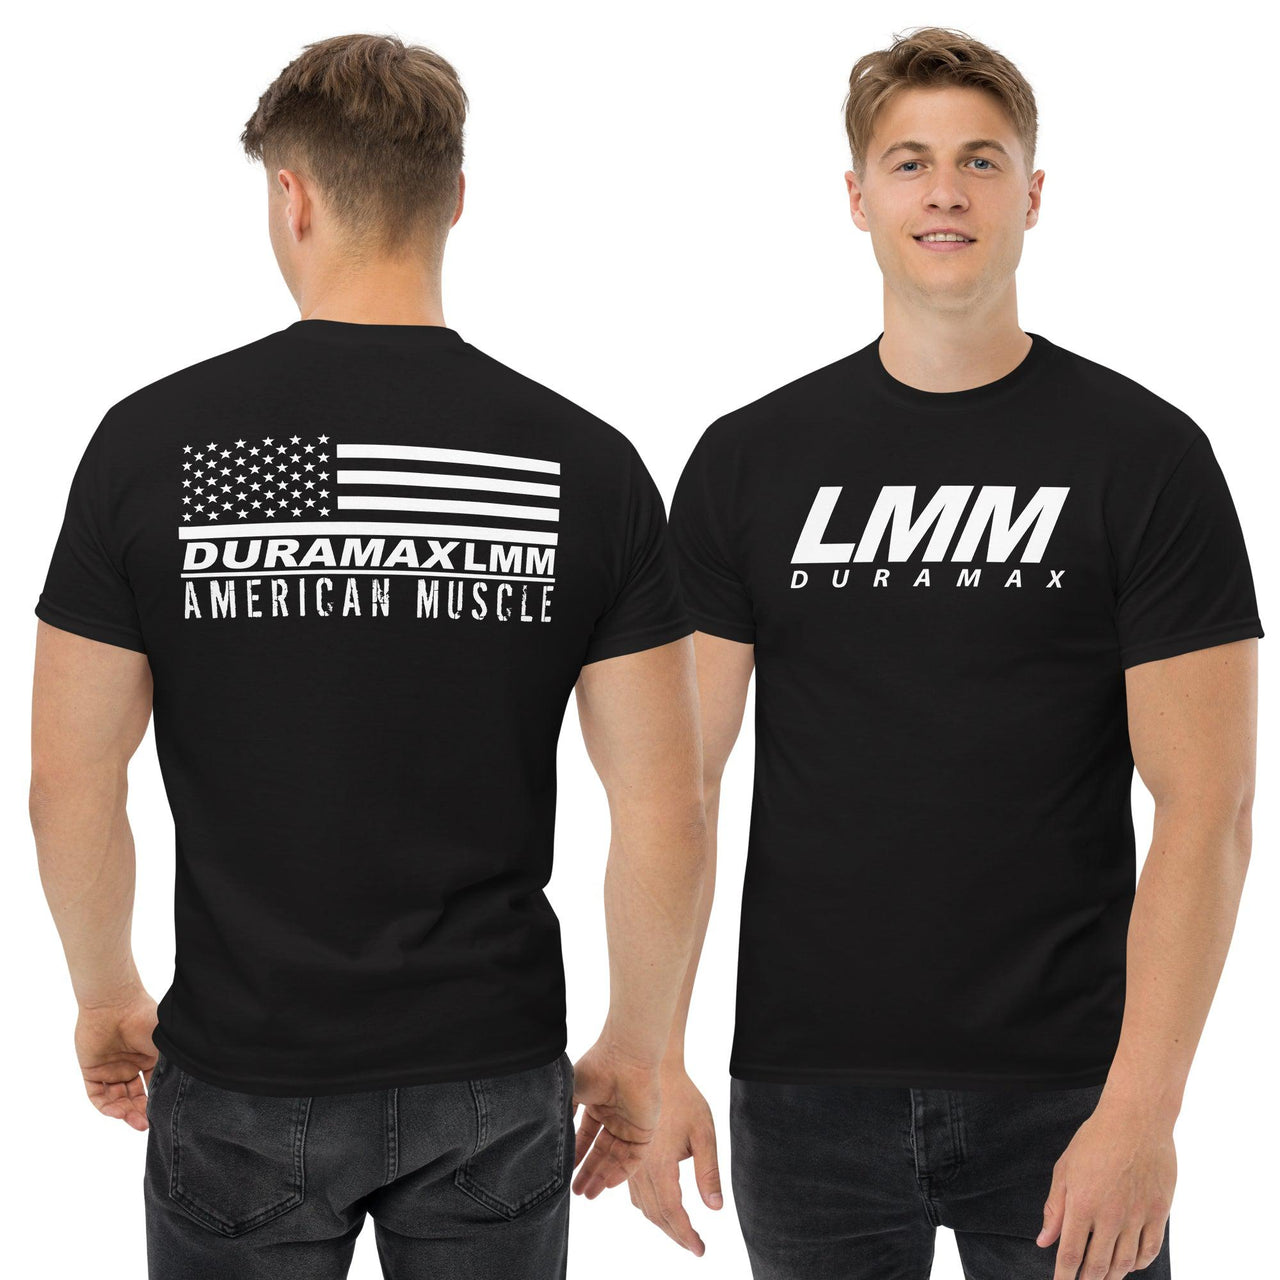 LMM Duramax T-Shirt With American Flag Design modeled in Black